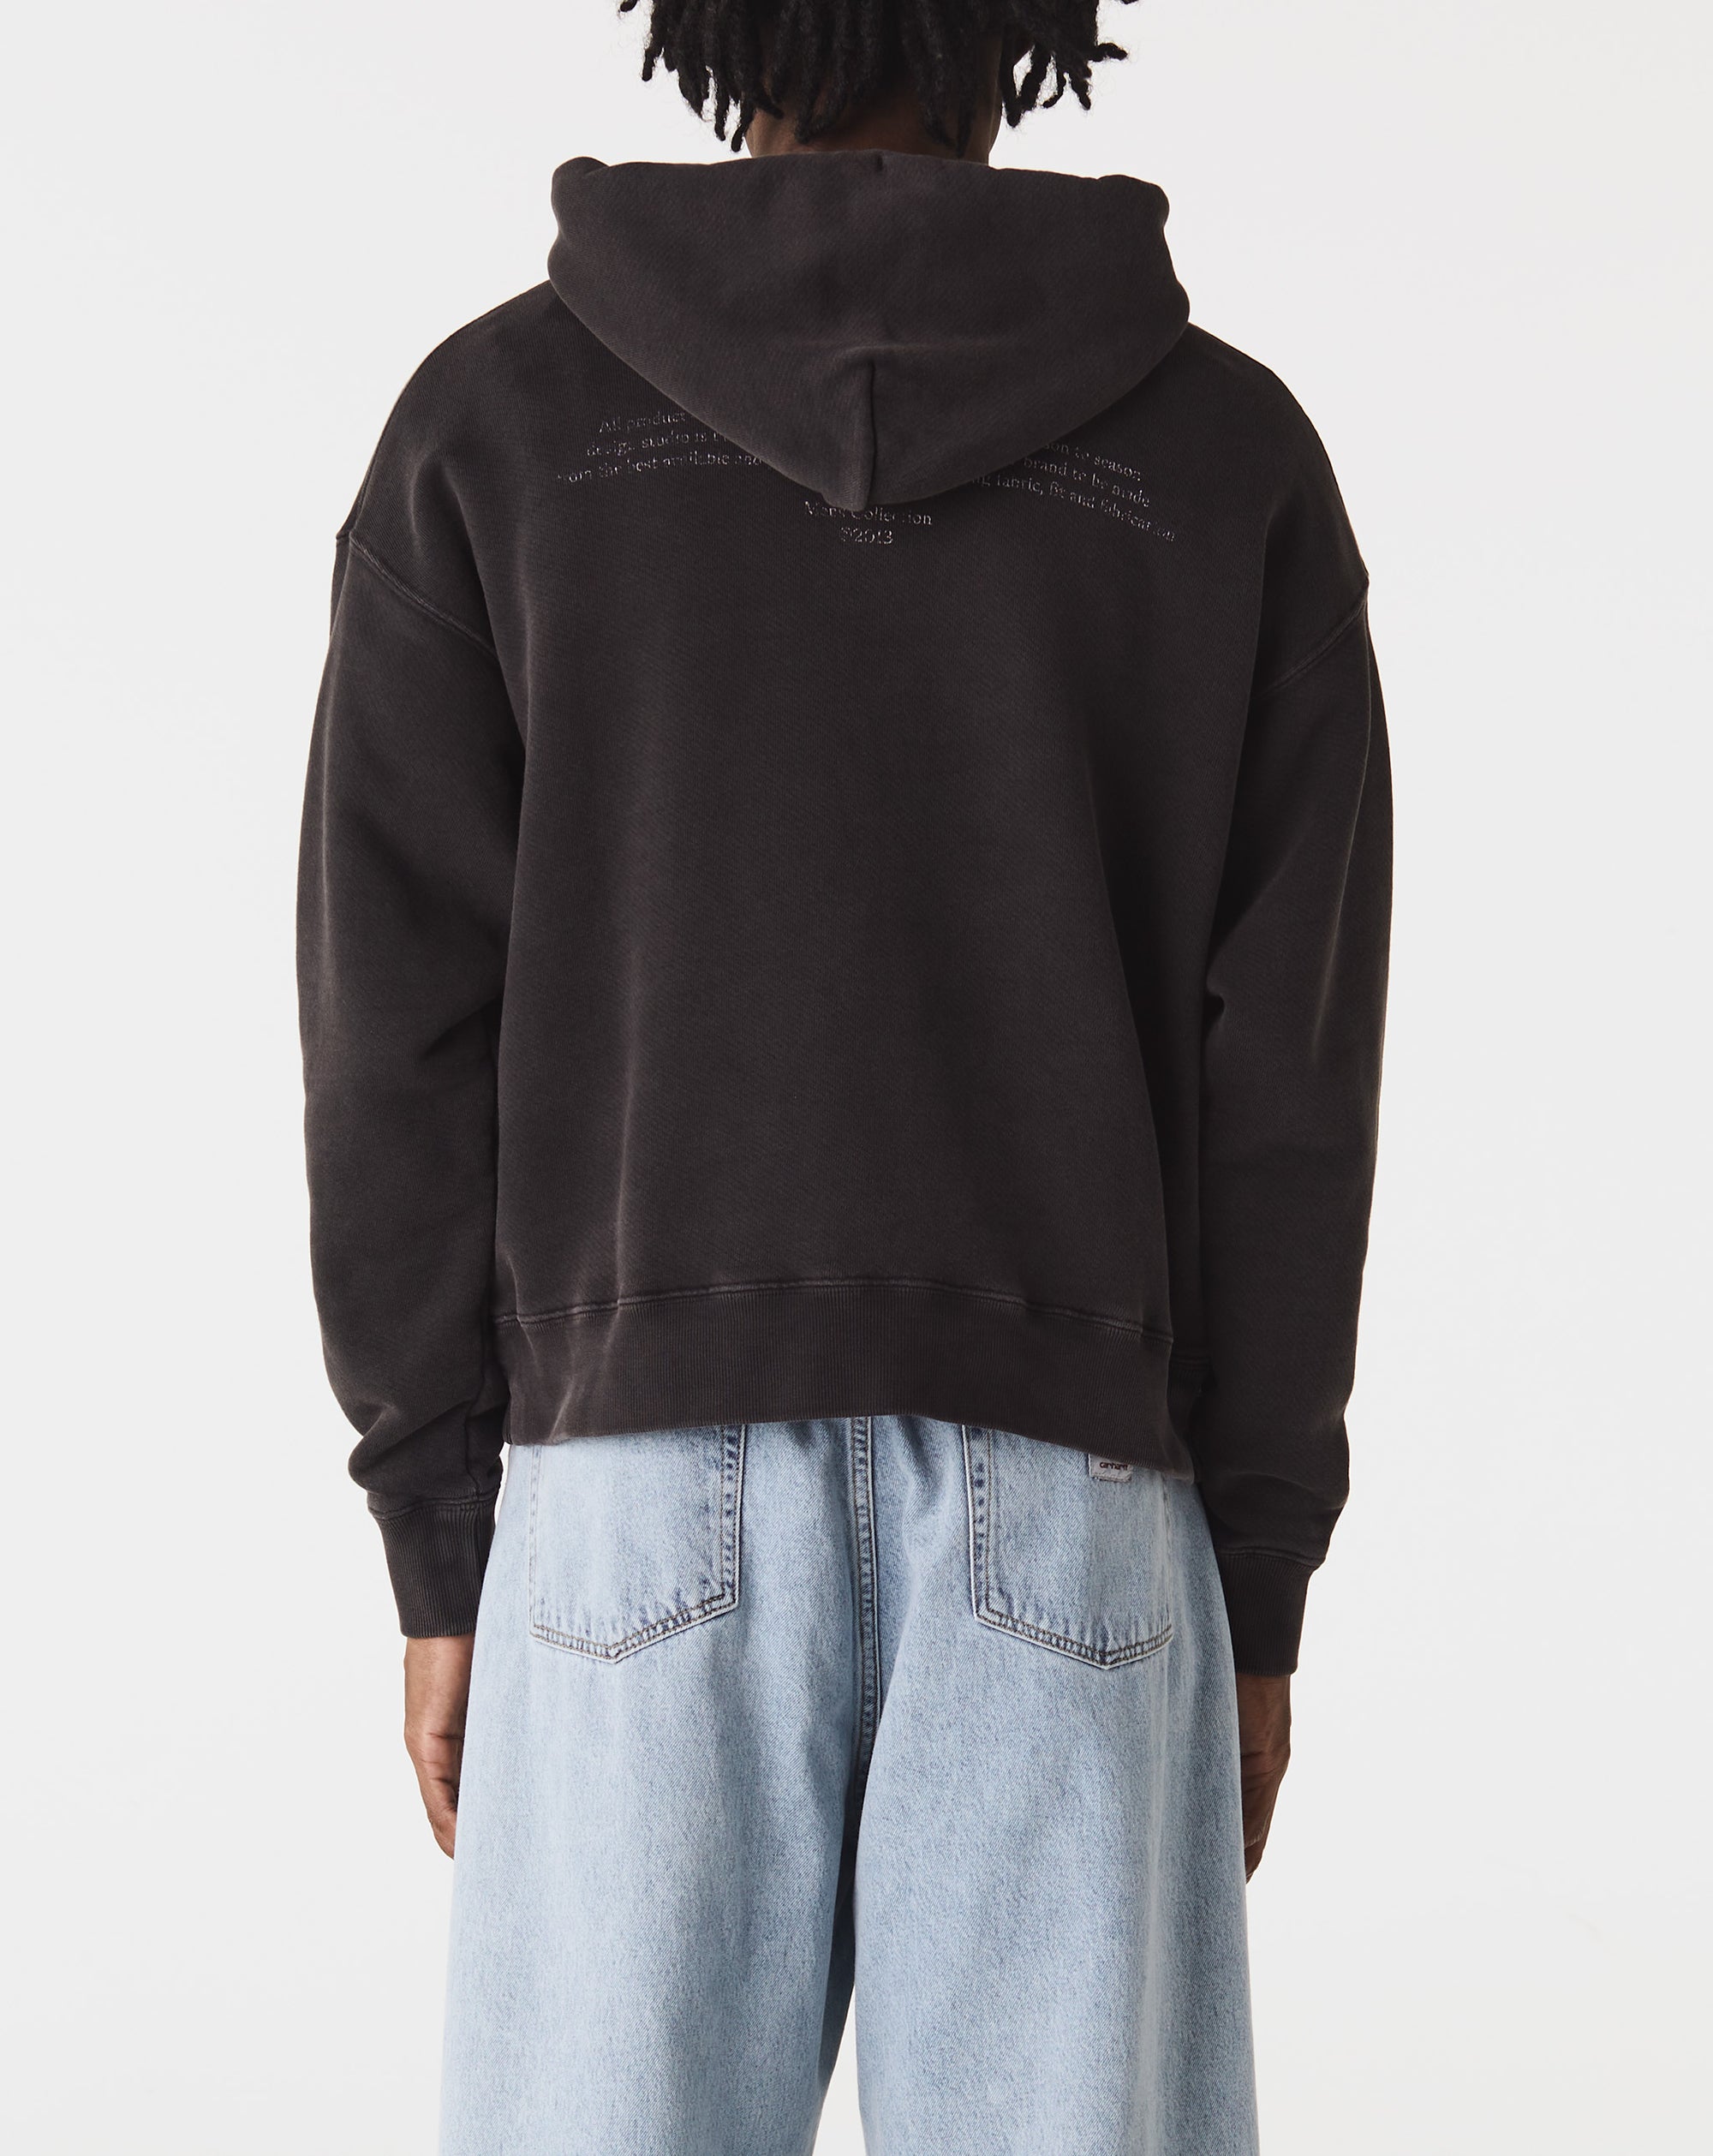 Off-White Mary Skate Hoodie - Rule of Next Apparel